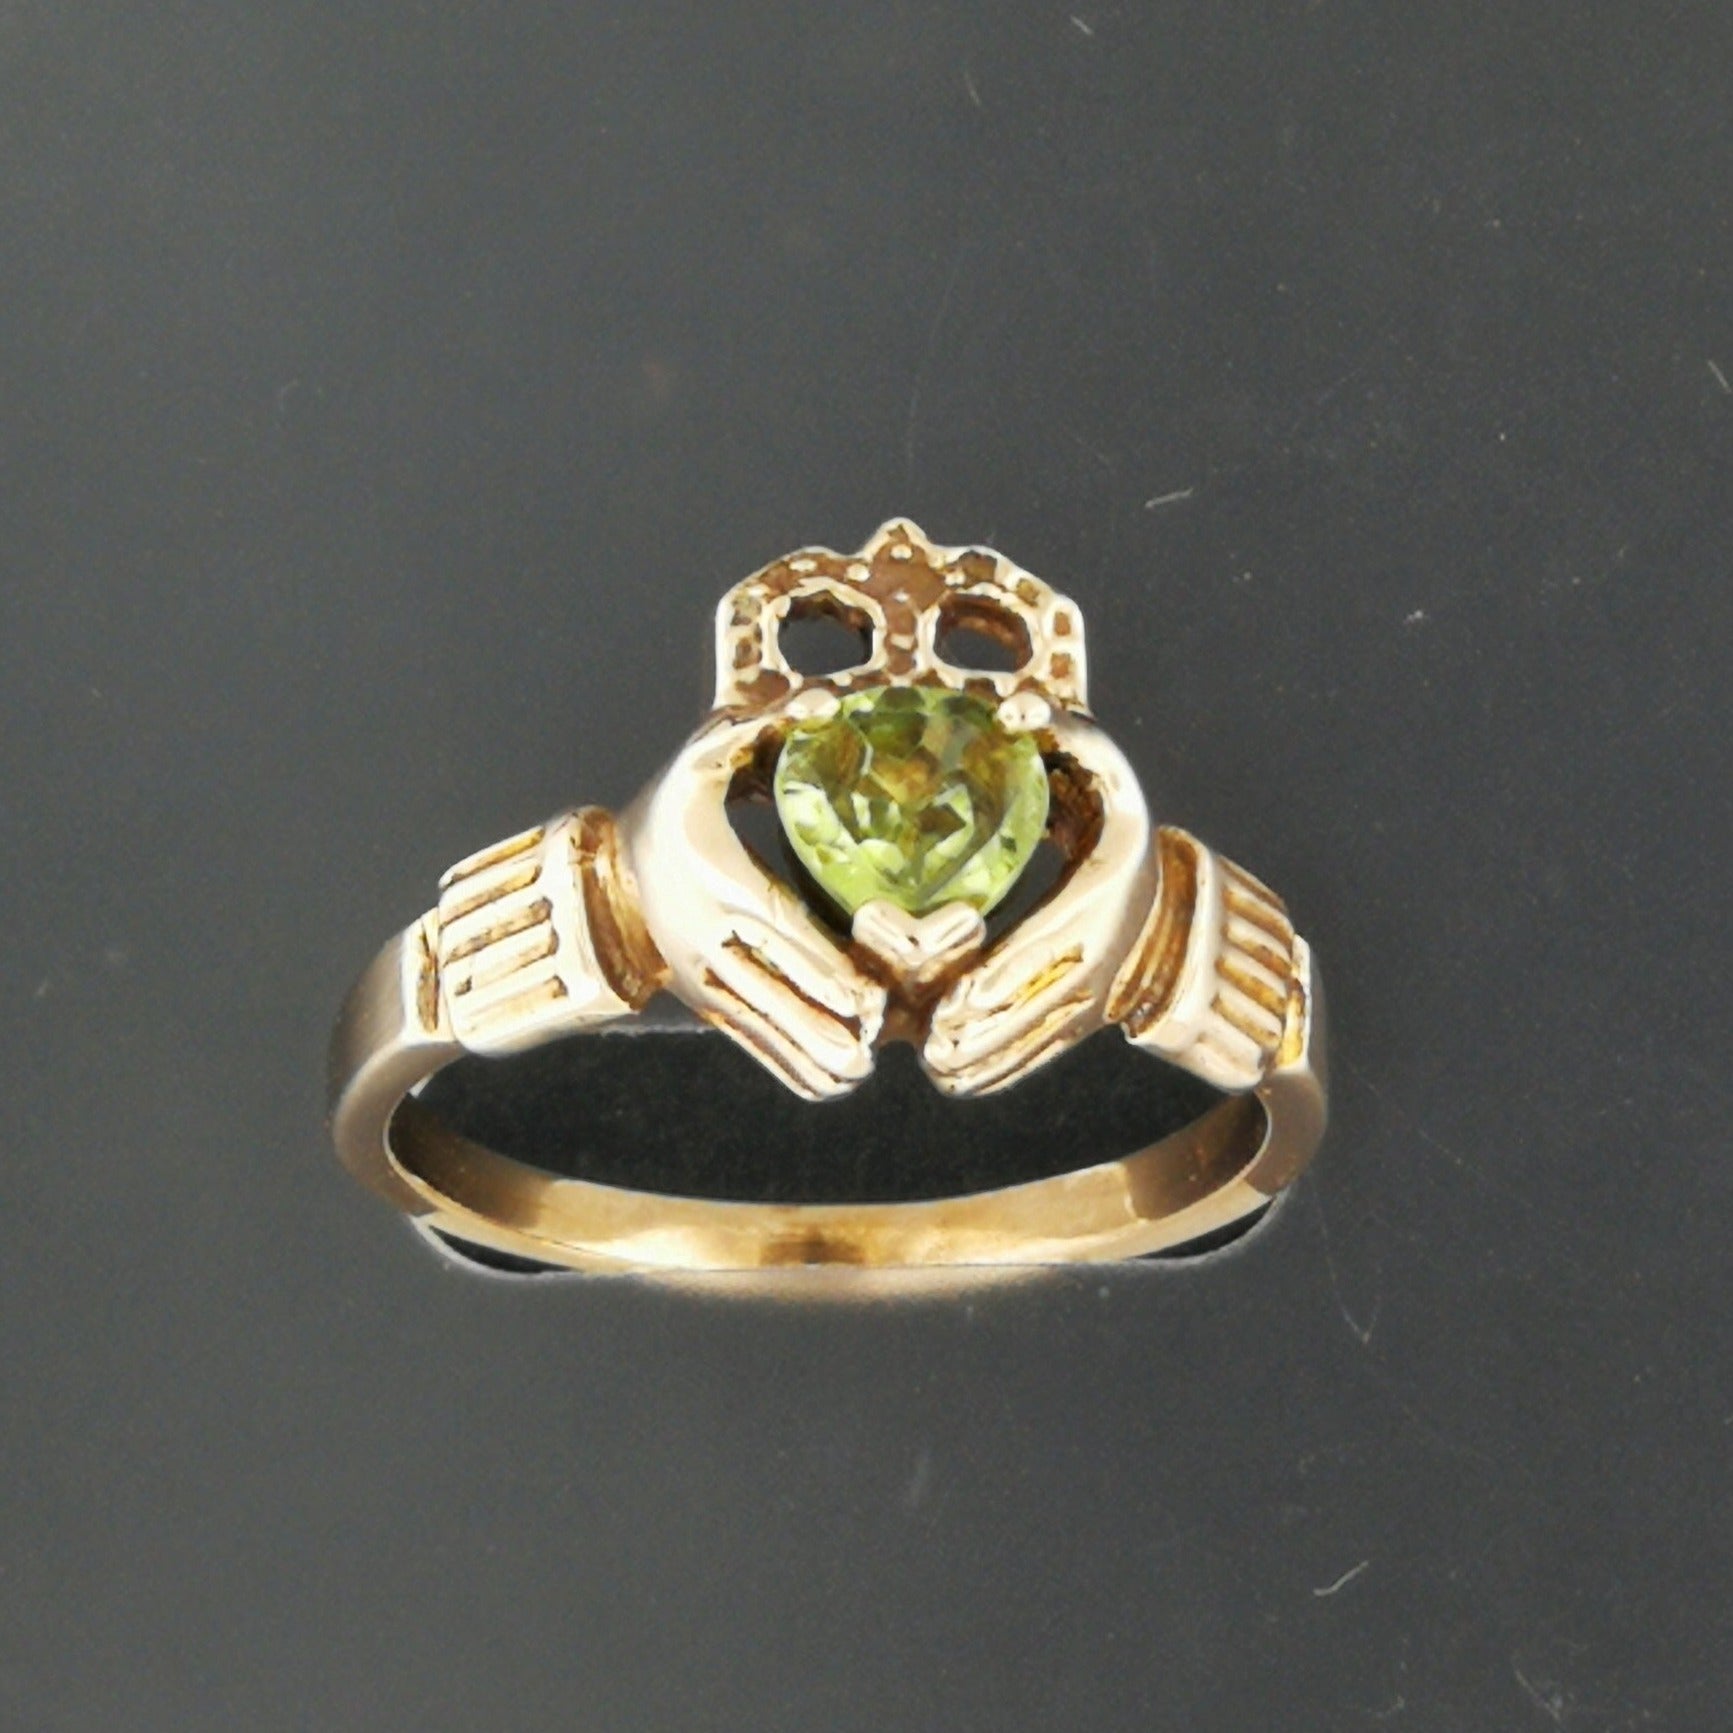 Claddagh Ring with Peridot Gemstone Heart in Antique Bronze, Irish Celtic Claddagh Ring with Gemstone, Ladies Celtic Claddagh Ring with Gemstone, Birthstone Claddagh Ring